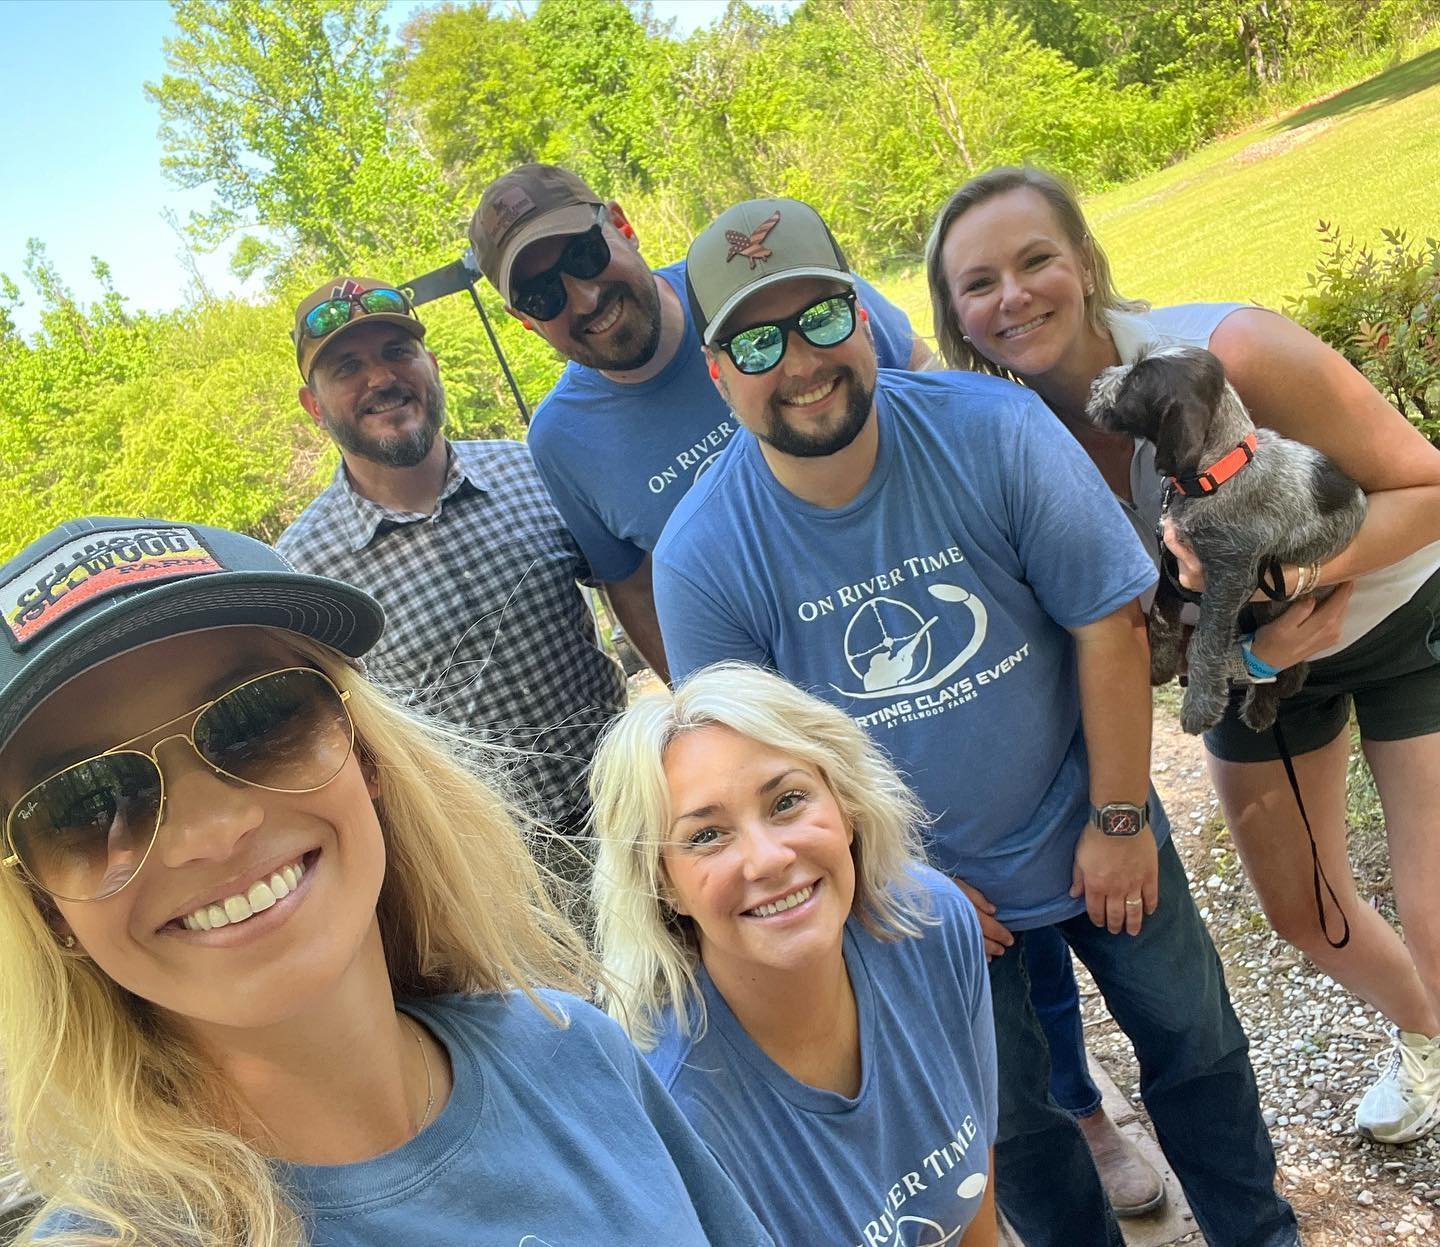 A huge thank you to everyone who came out to Selwood Farm for our 4th Annual Sporting Clays Event! We have the best Junior Board who hosted it!! In addition to door prizes and prizes for the top shooters we also had lessons for the shooter who needed